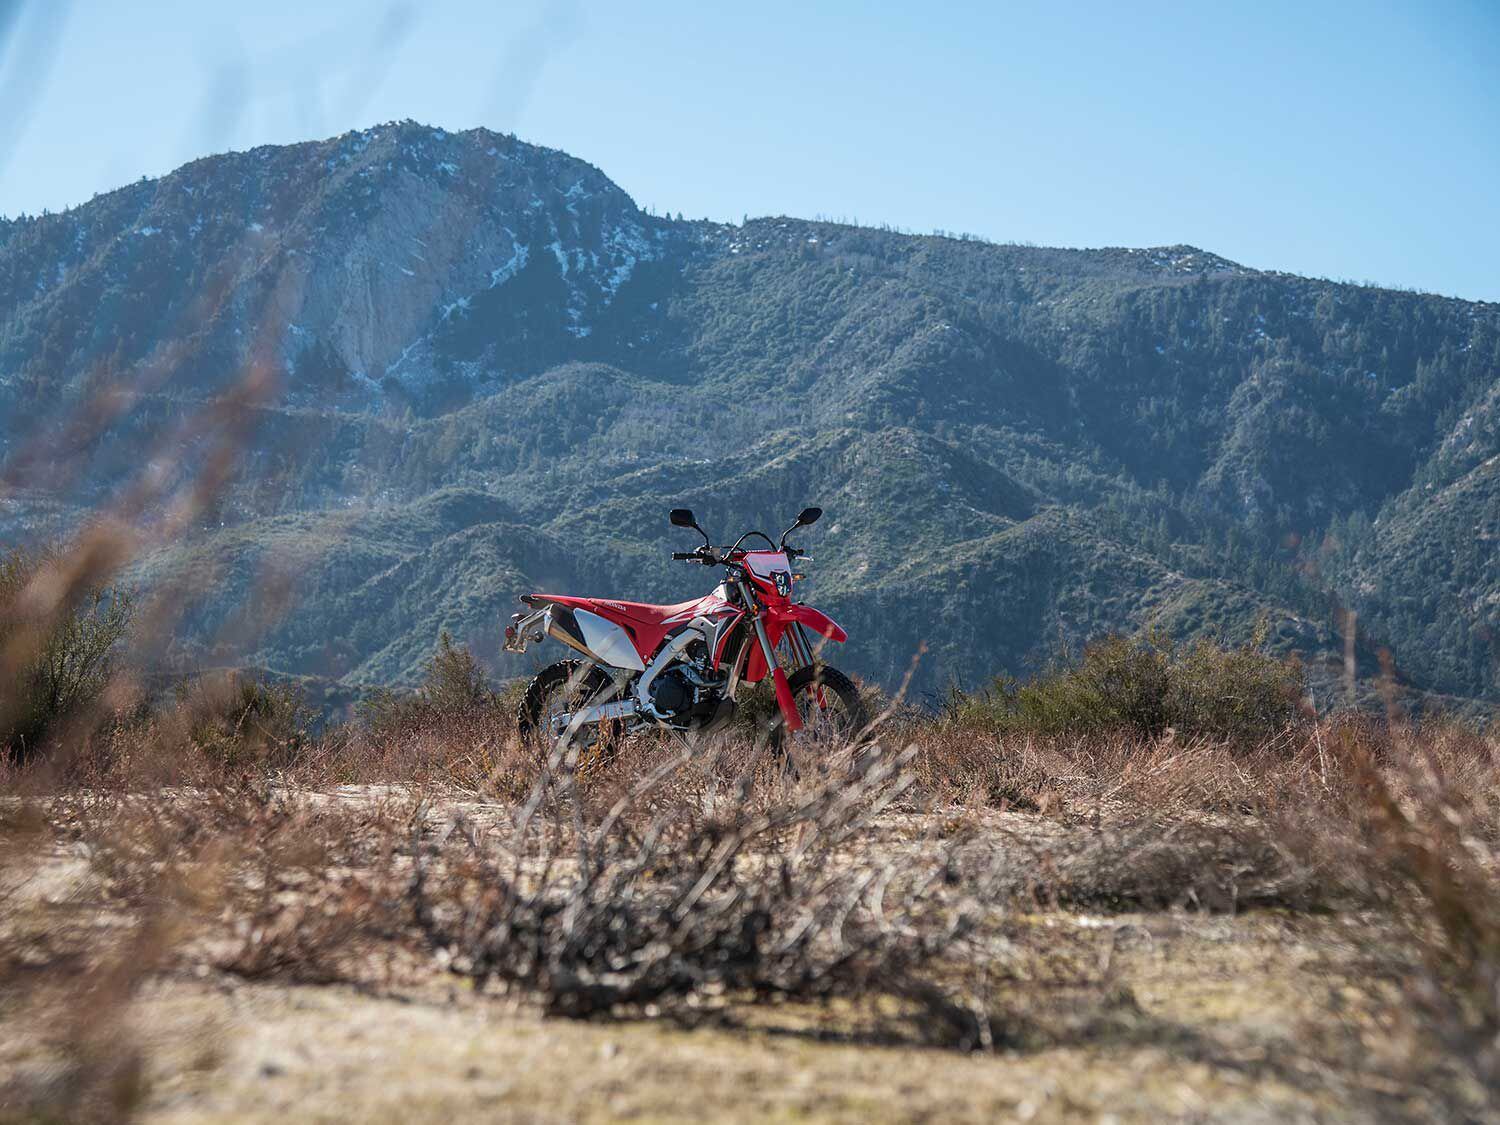 Getting lost in nature seems to be the CRF450L’s ultimate mission.